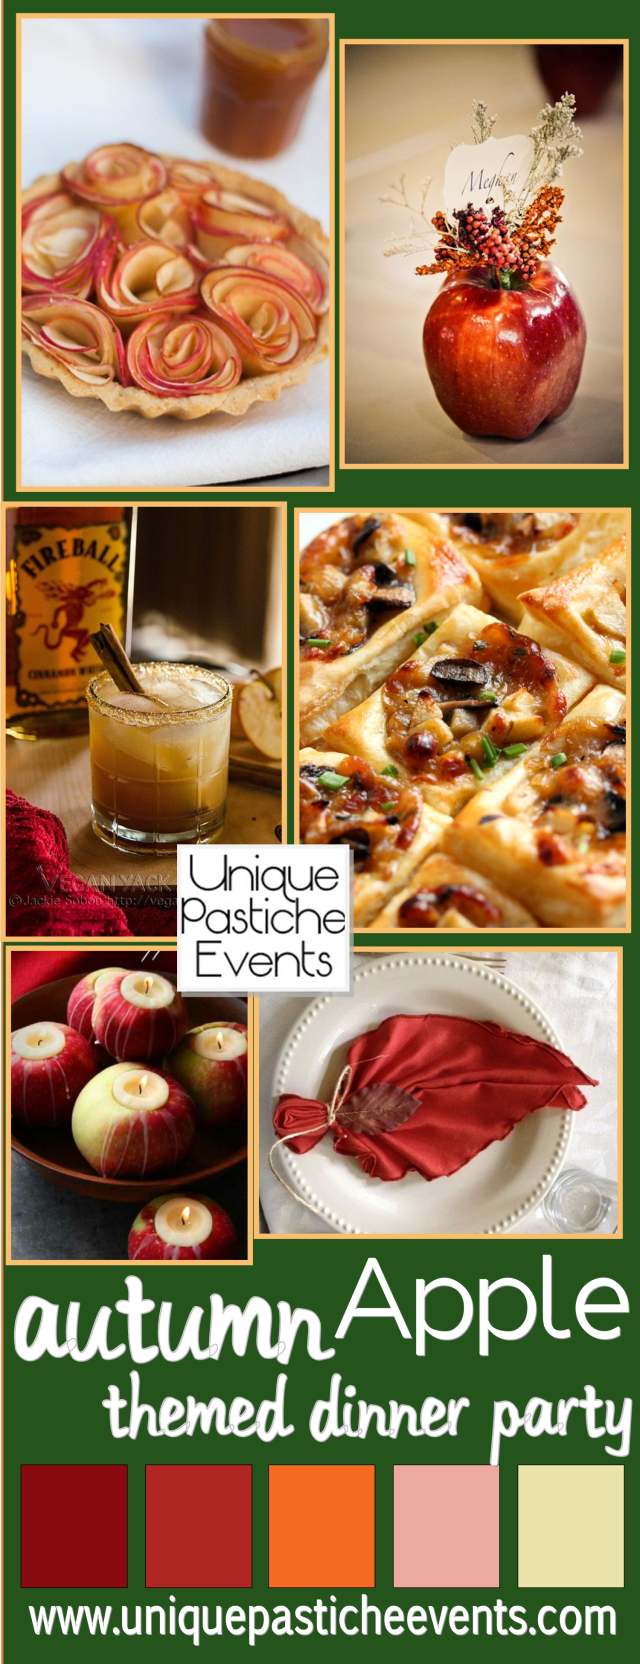 Apple Themed Dinner Party and Menu Ideas by Unique Pastiche Events